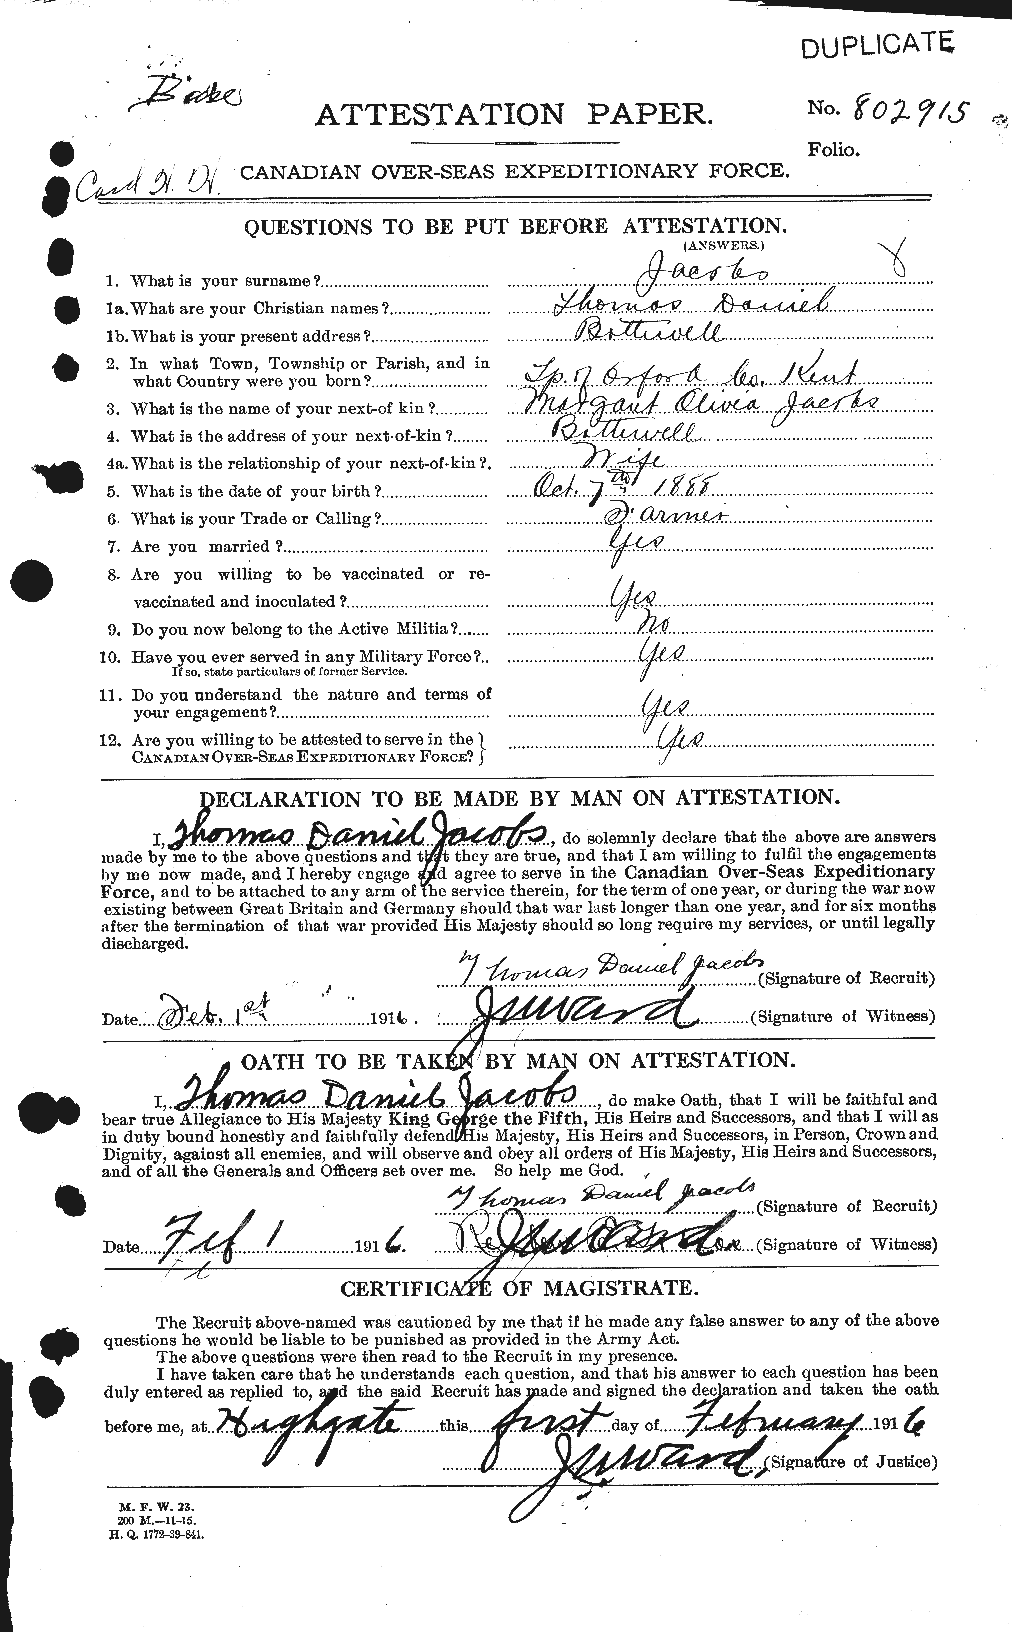 Personnel Records of the First World War - CEF 413211a